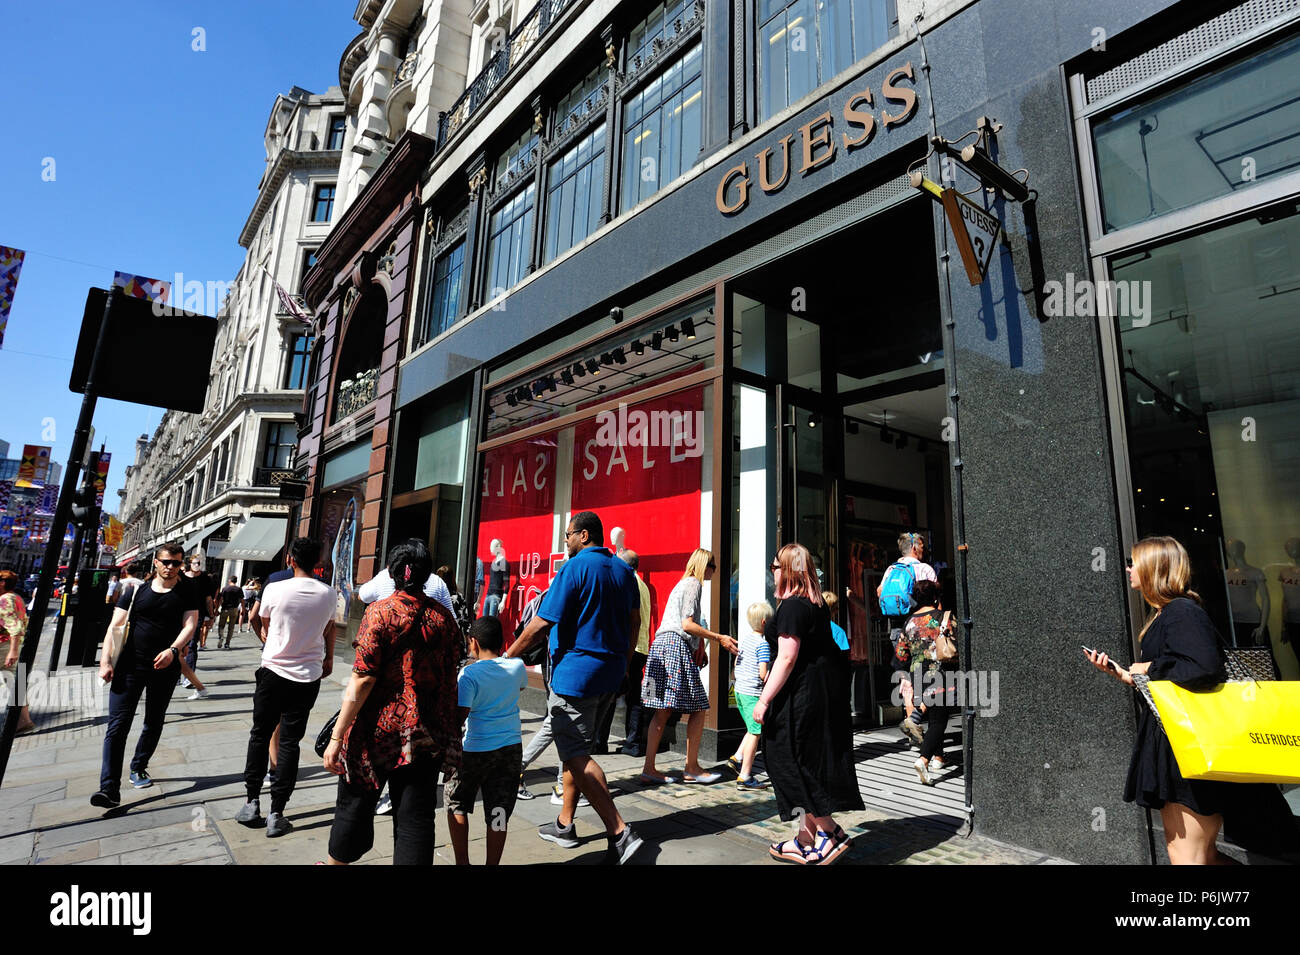 Guess Store Shop Uk High Resolution Stock Photography and Images - Alamy